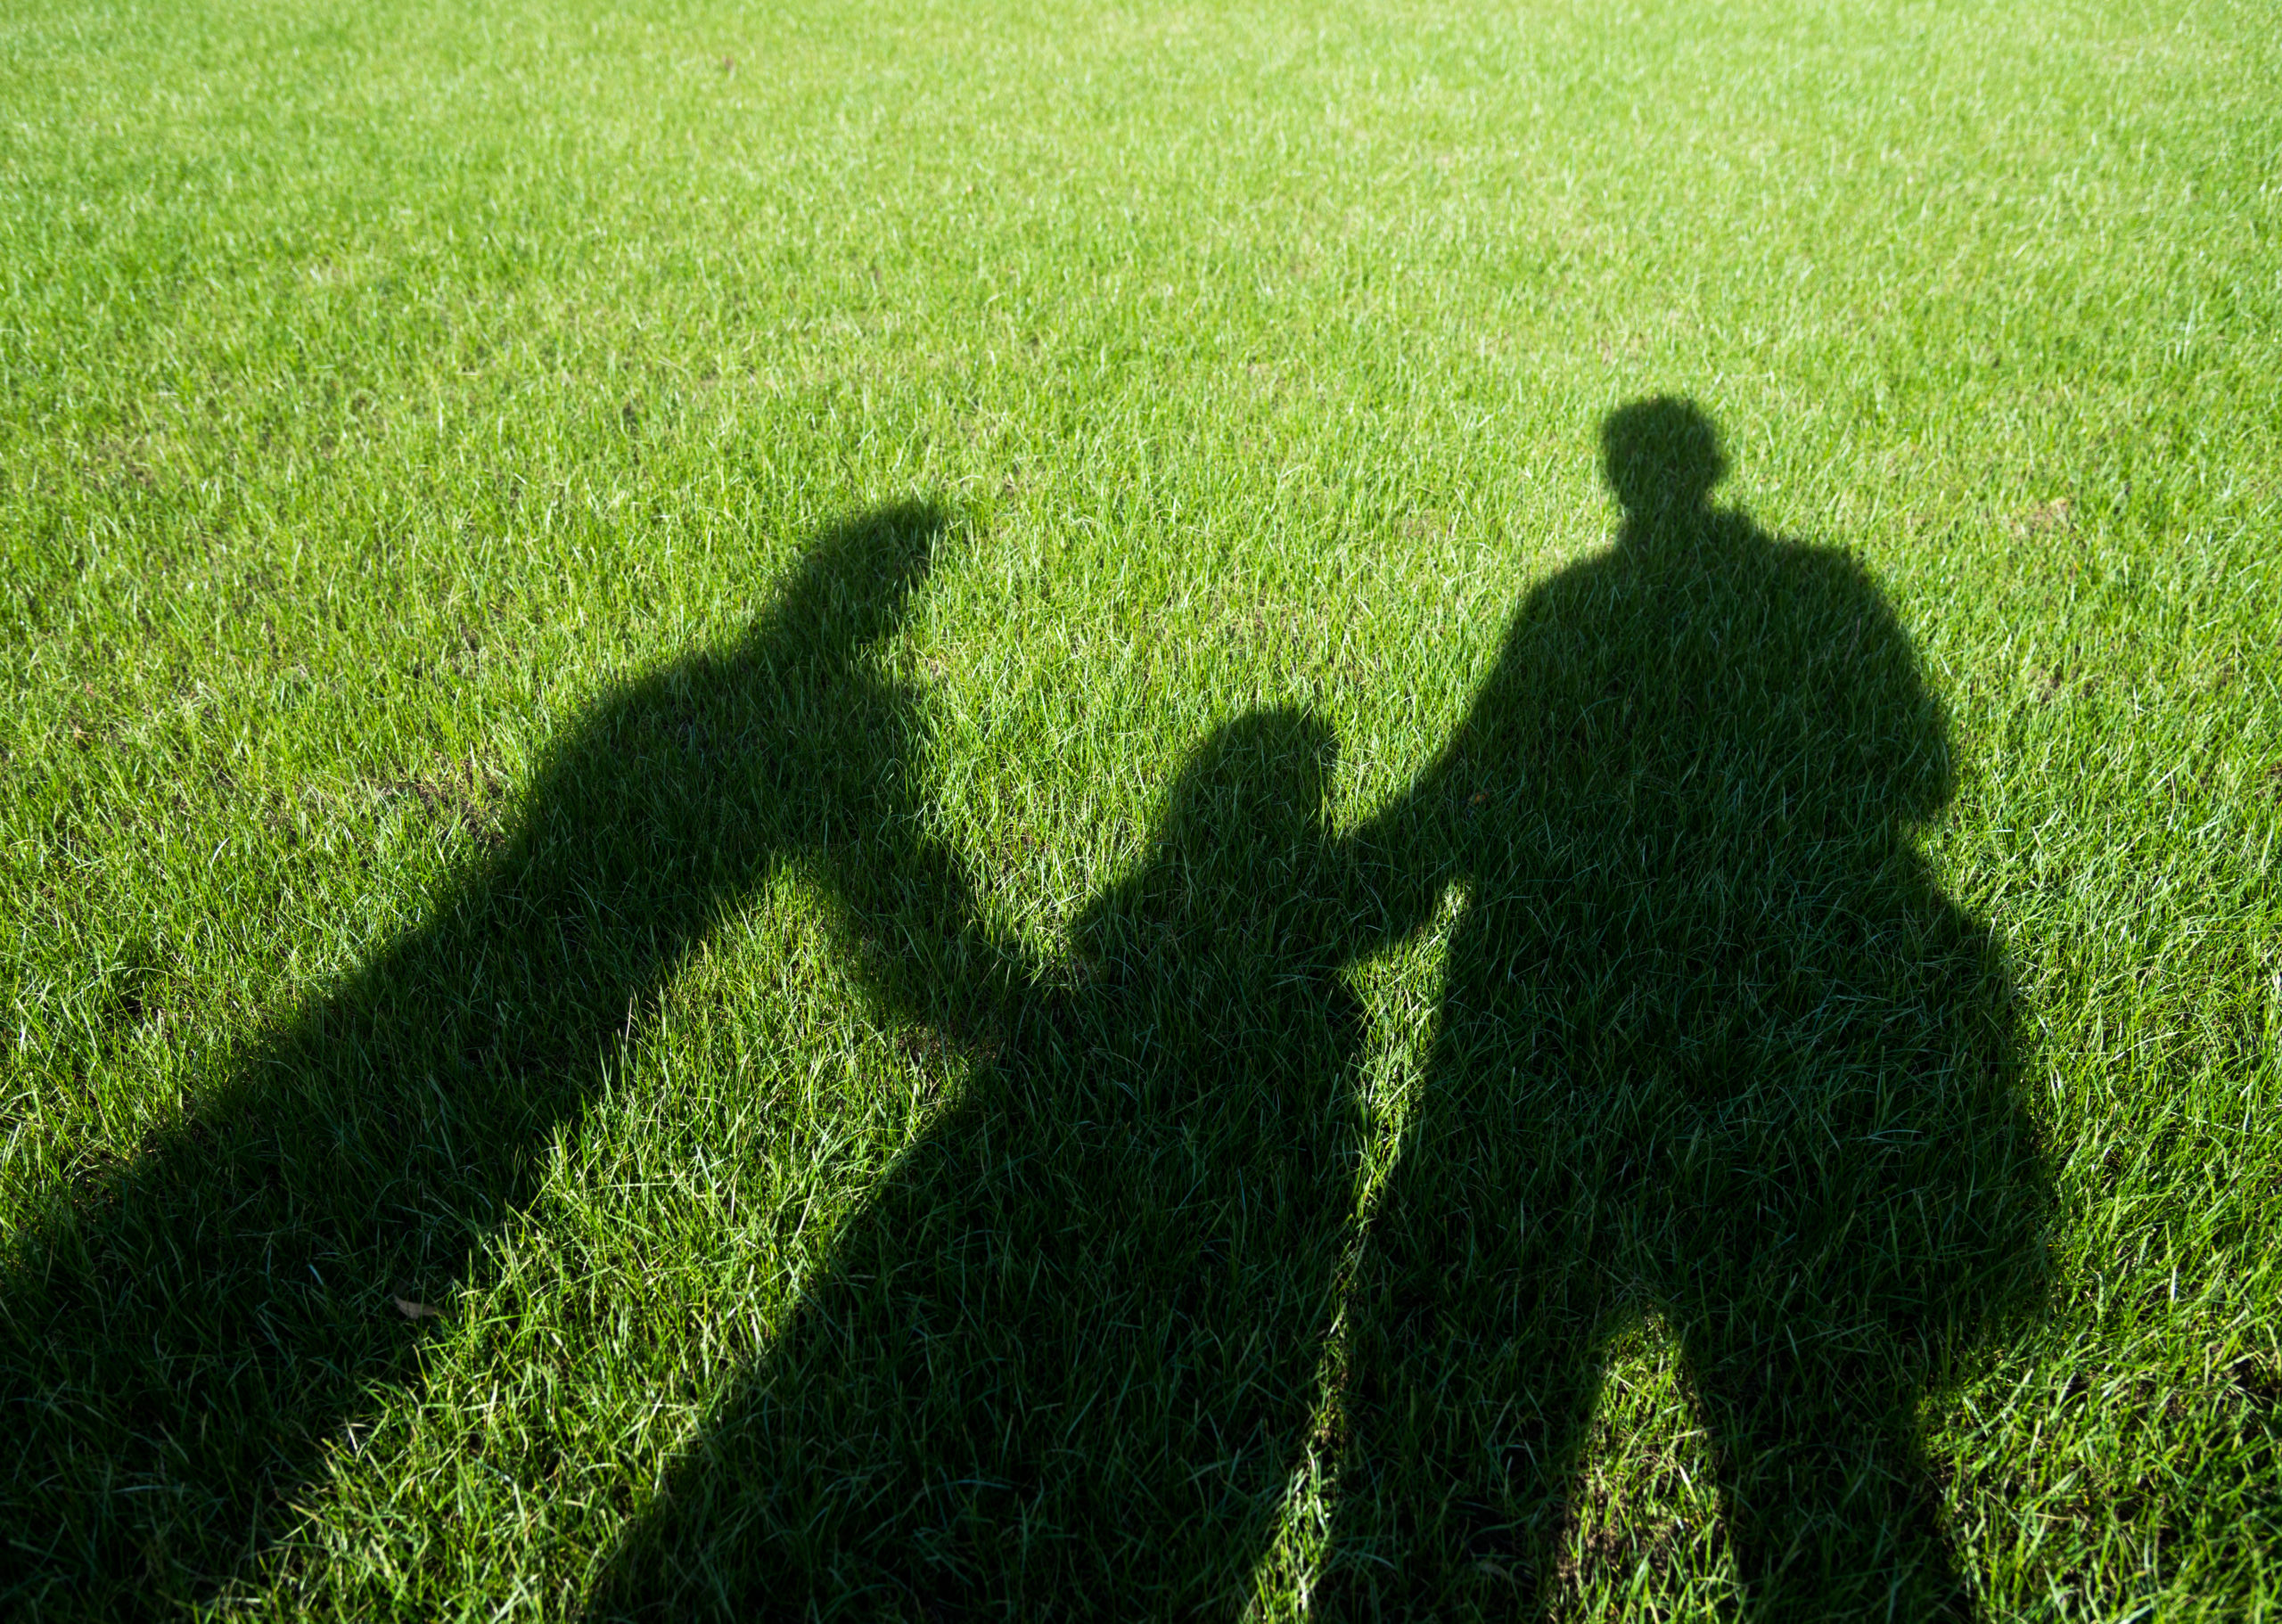 Shadows on the lawn of a family holding hands.